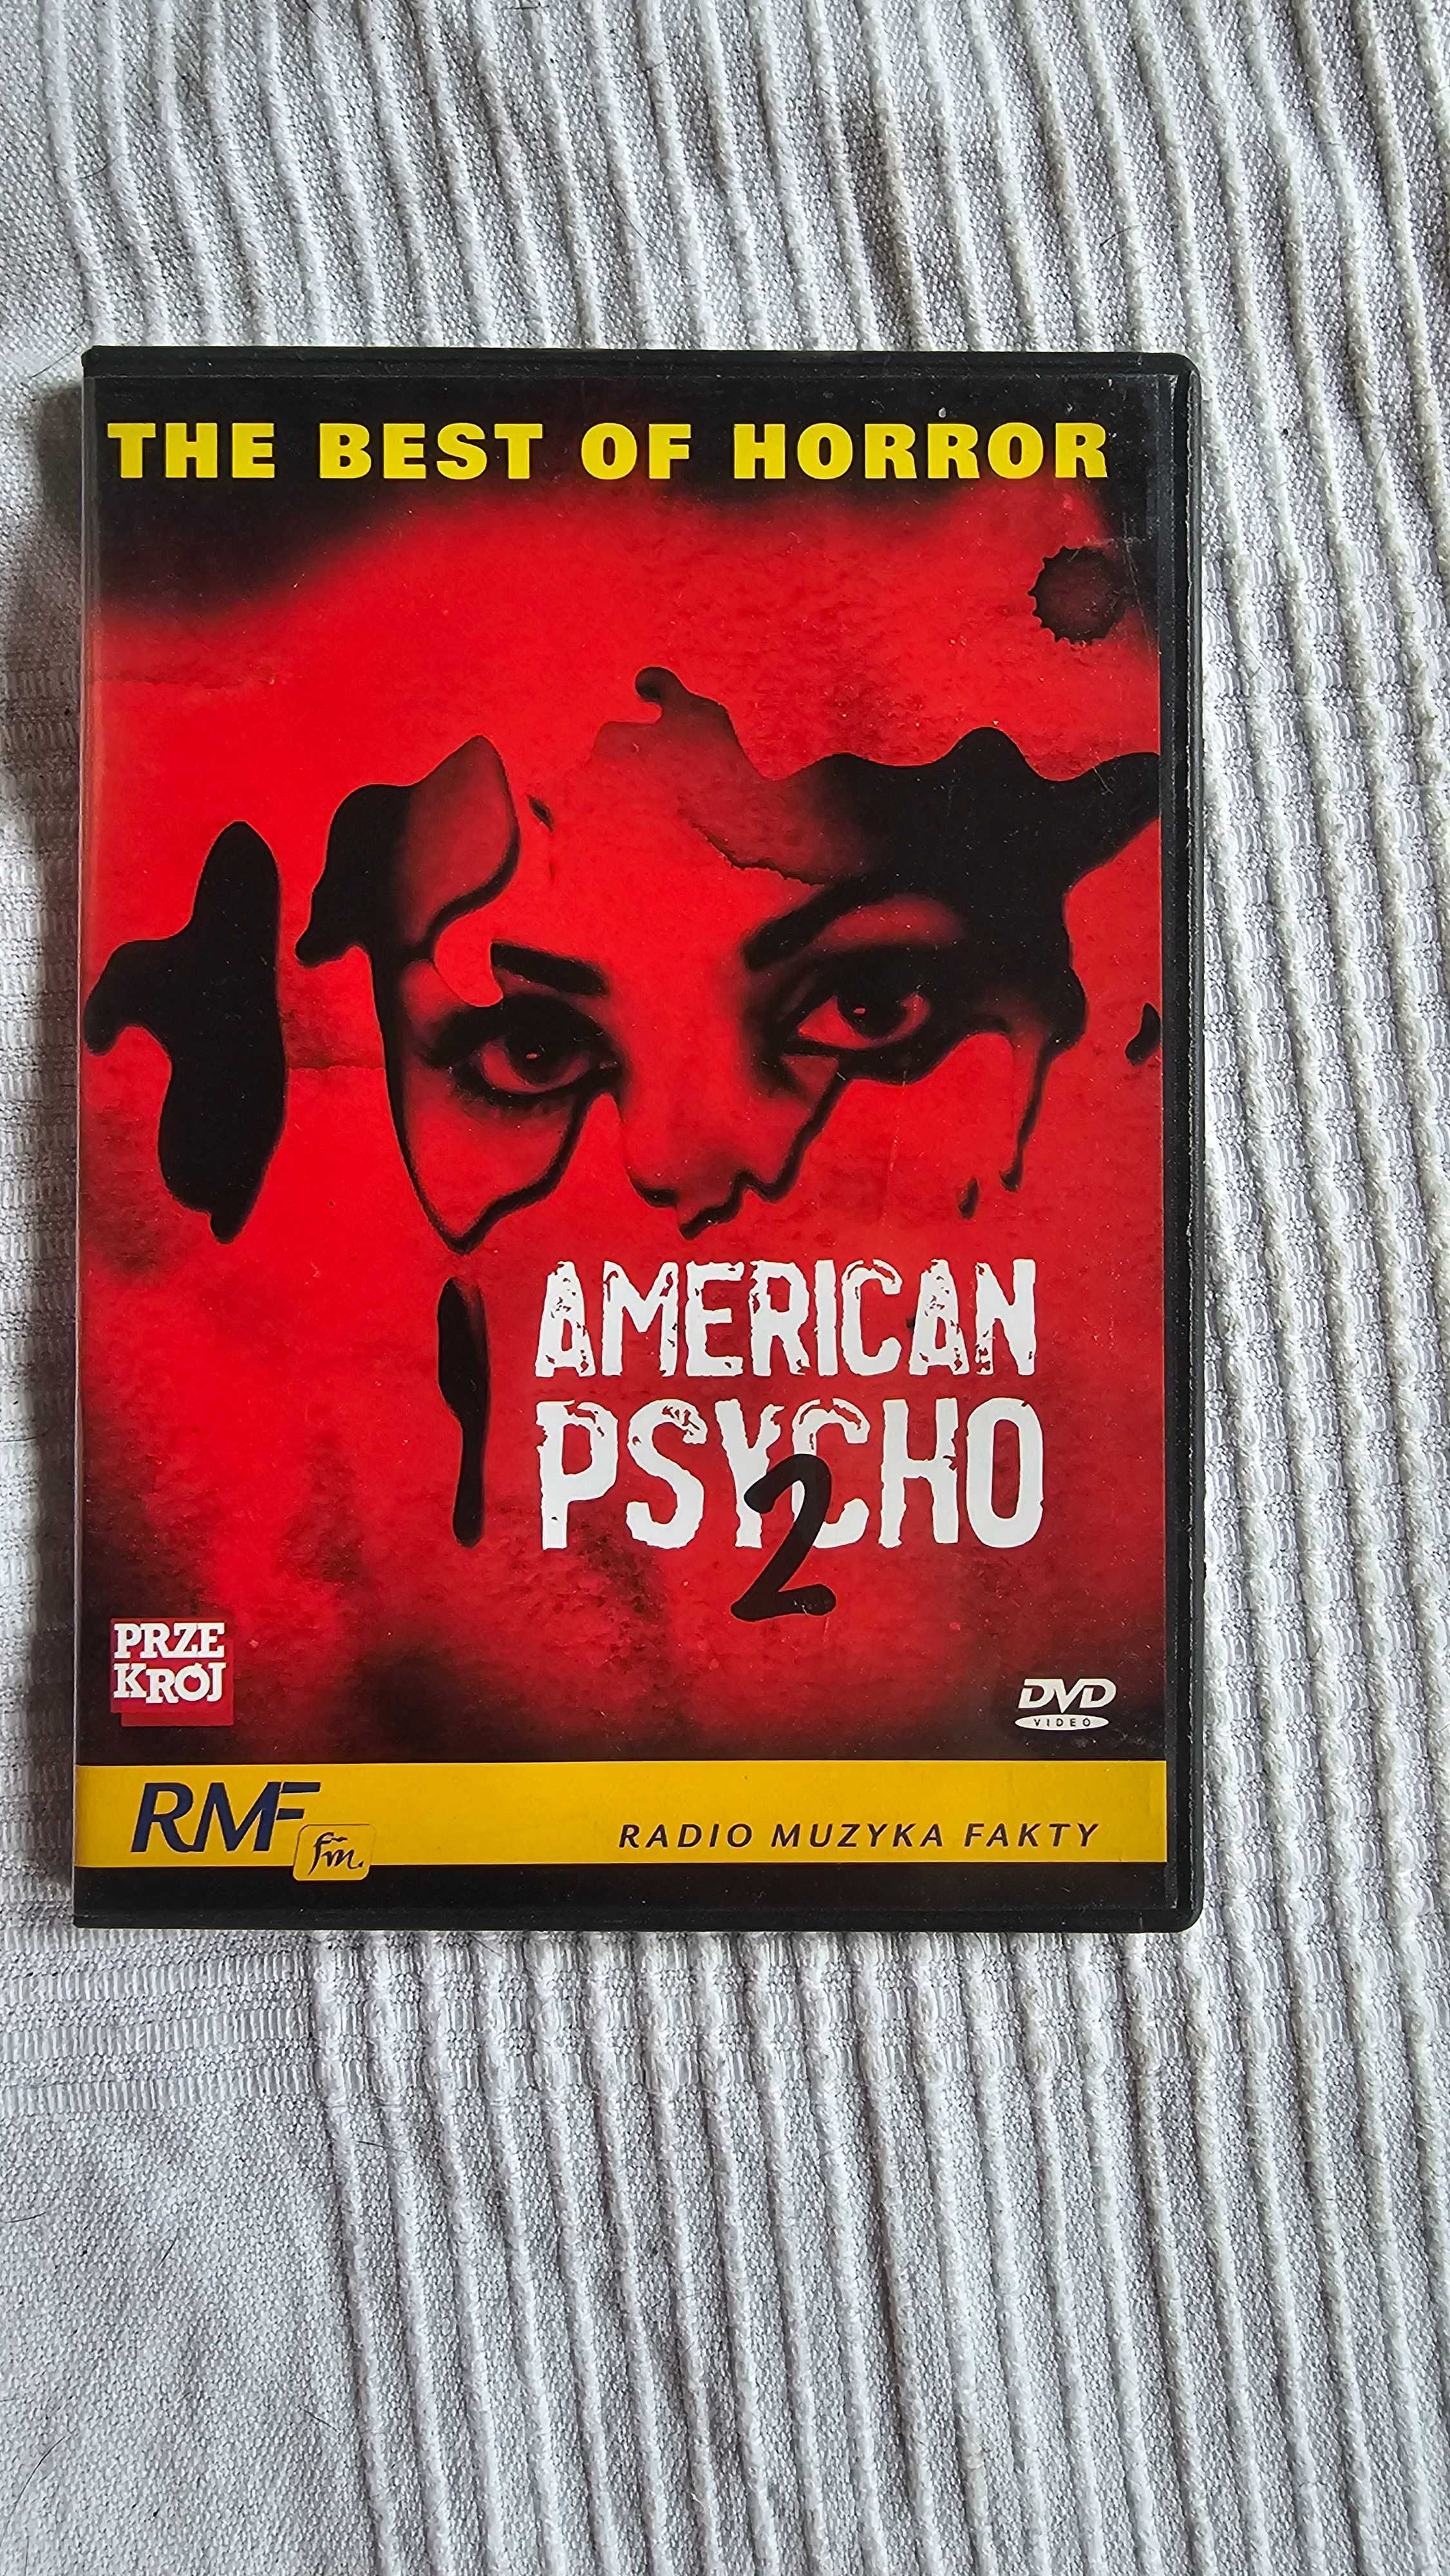 DVD American Psycho 2 The best of horror